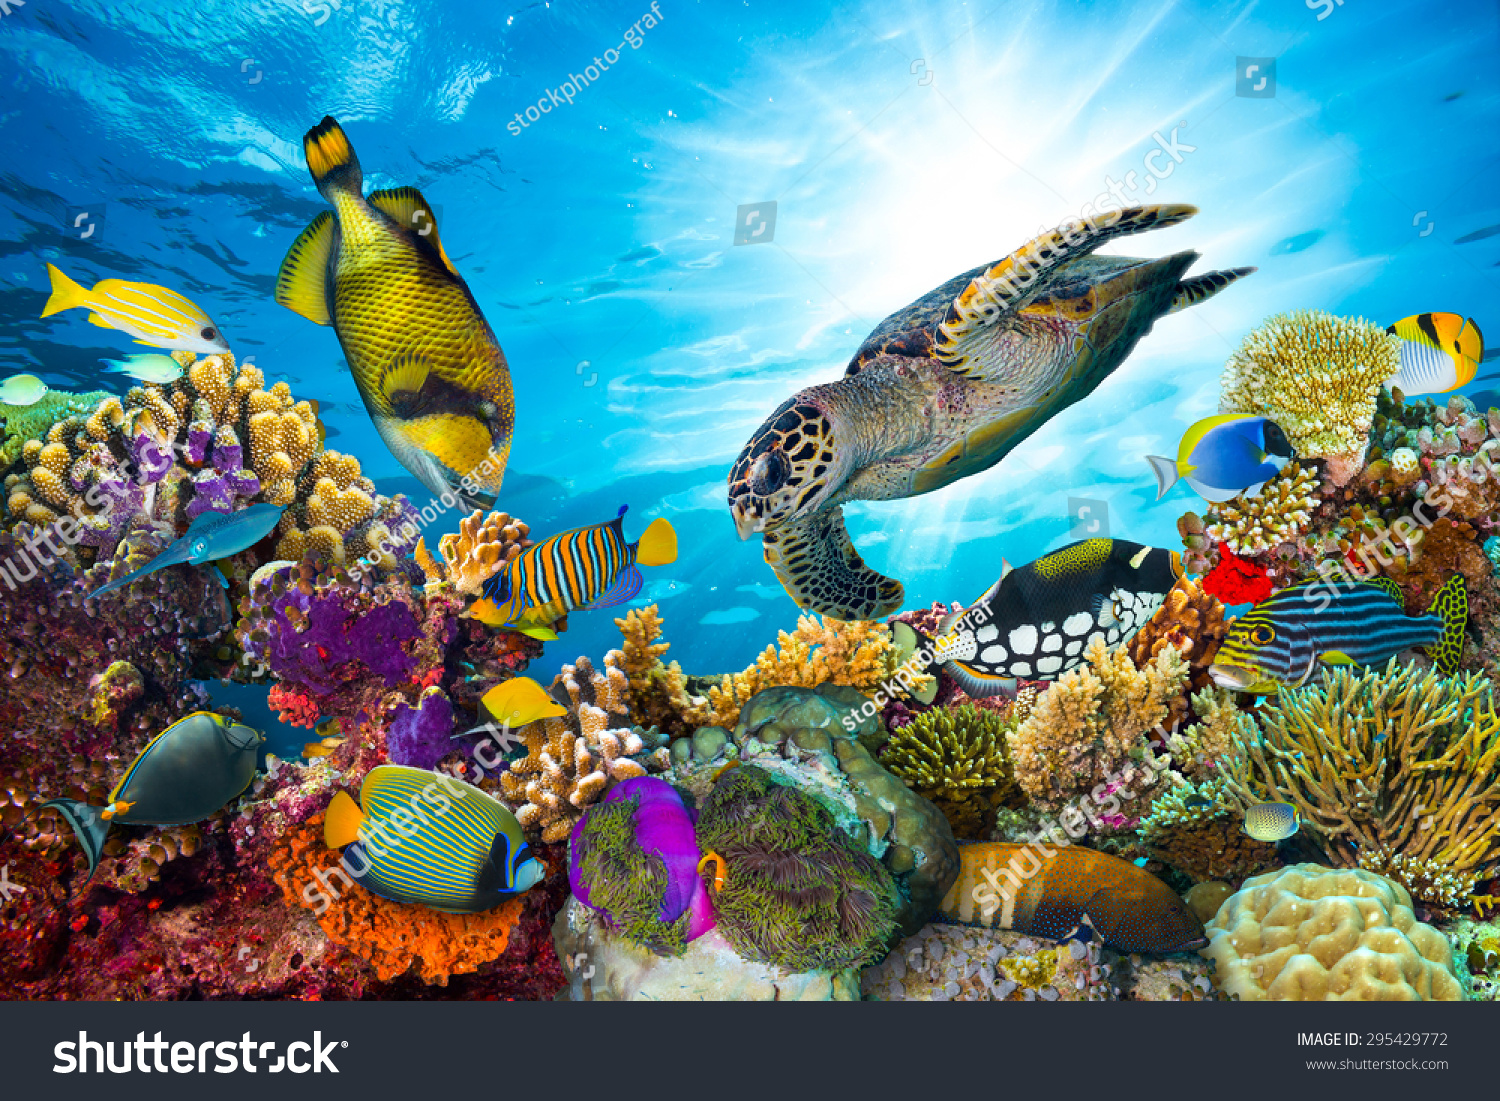 colorful coral reef with many fishes and sea turtle #295429772